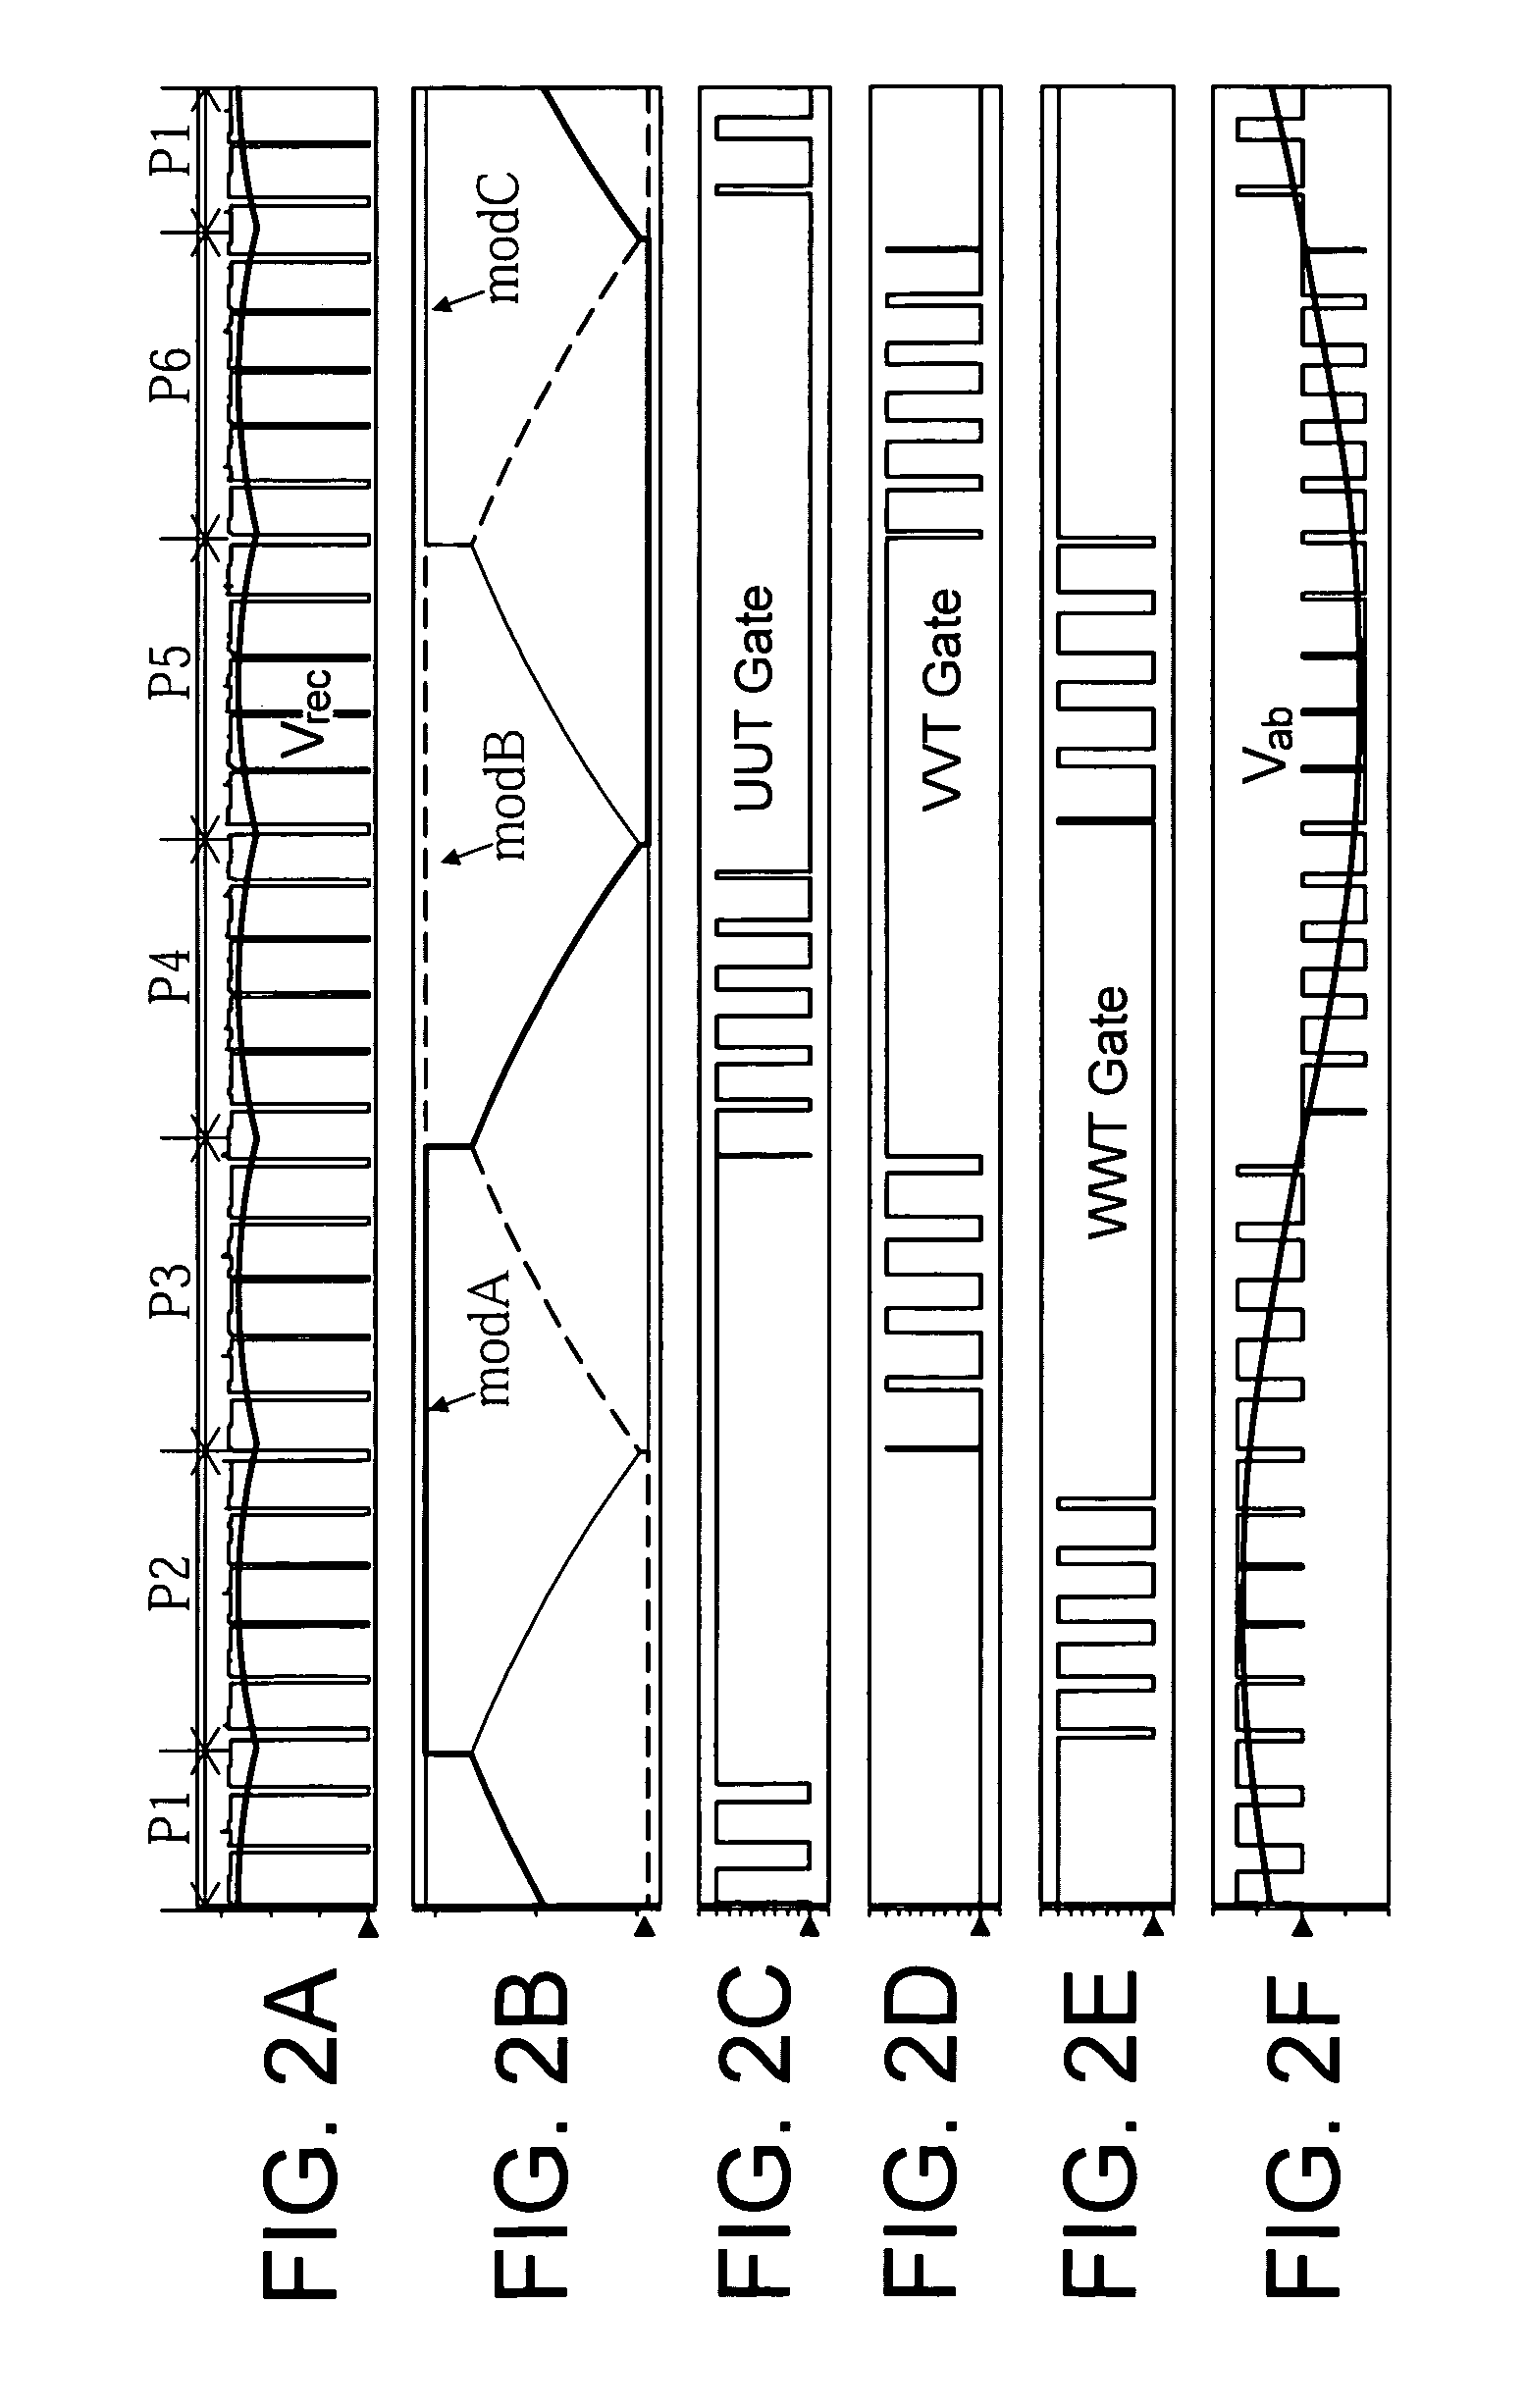 Multiphase Converter Apparatus and Method